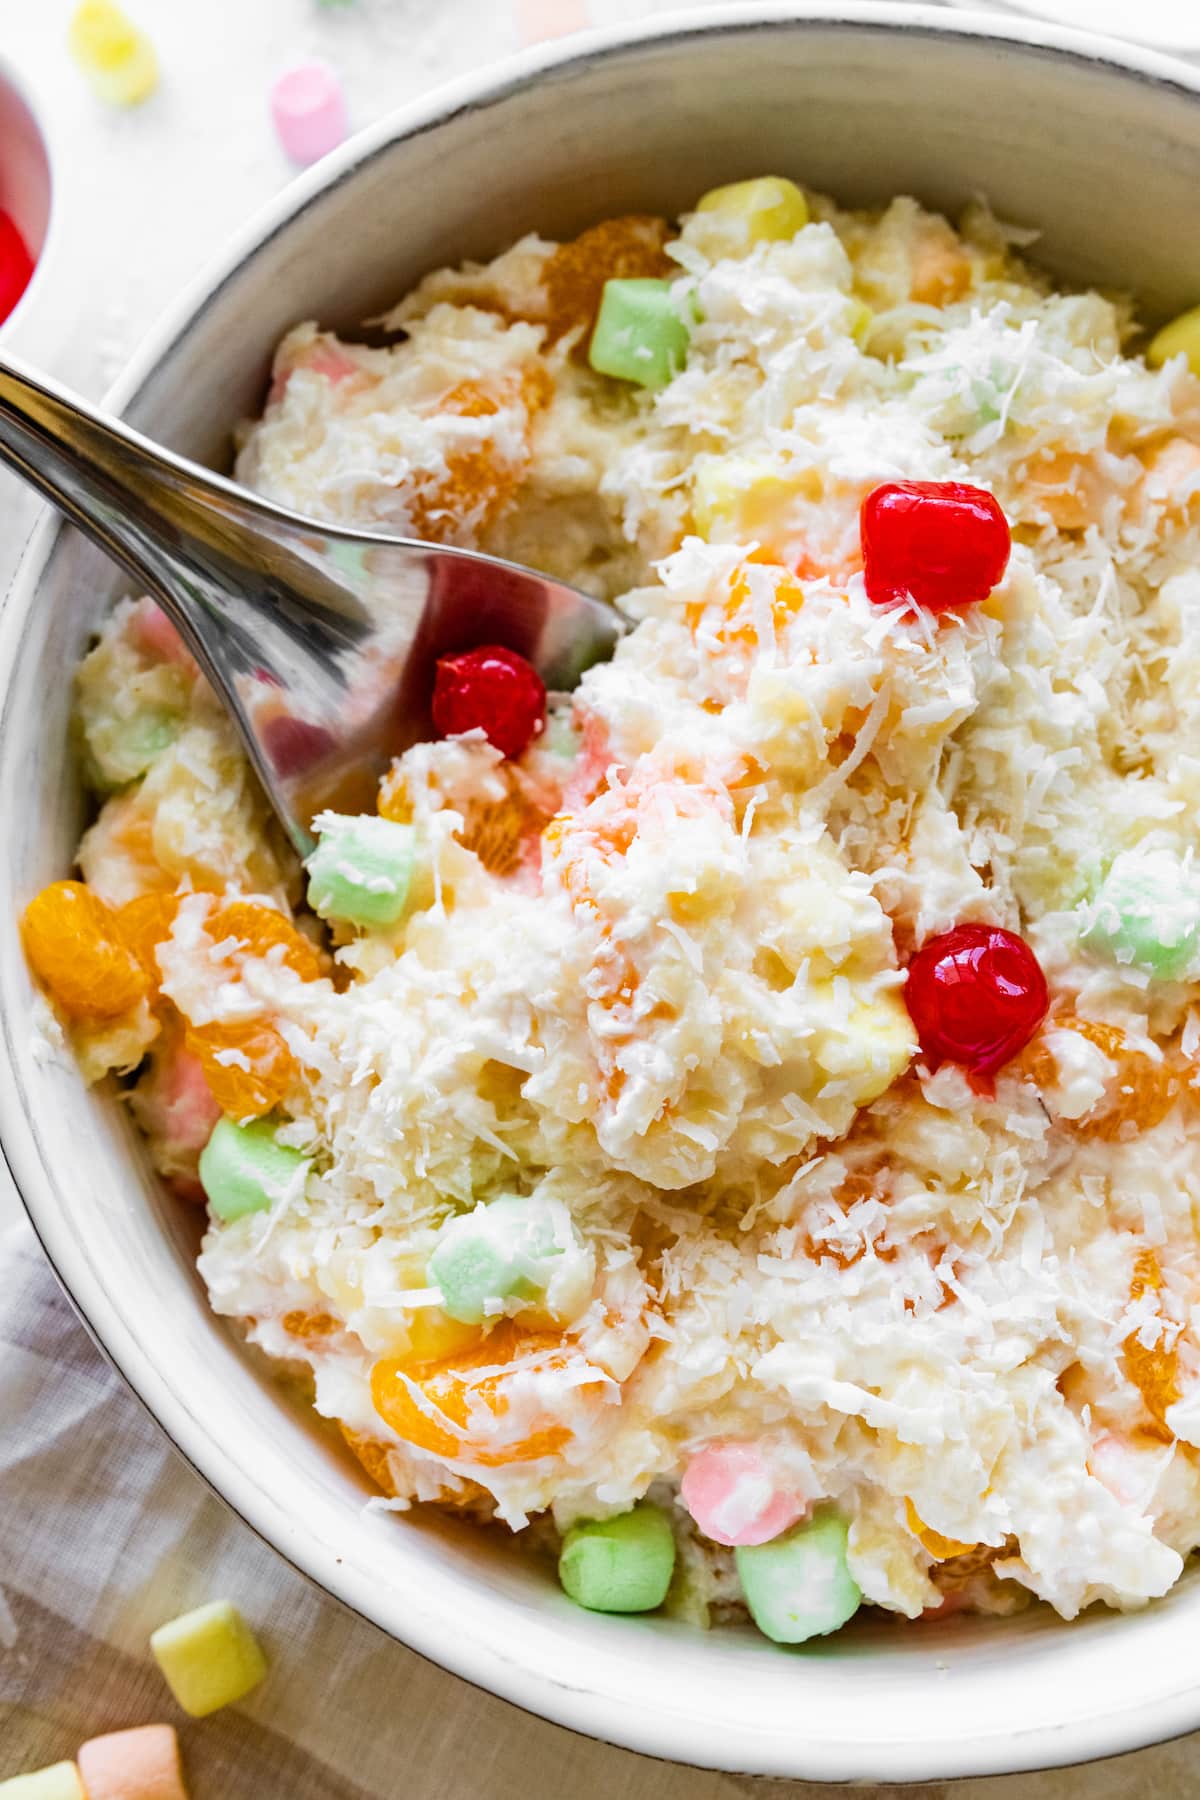 Ambrosia salad in a large bowl with a metal spoon topped with shredded coconut, cherries, and mini marshmallows.